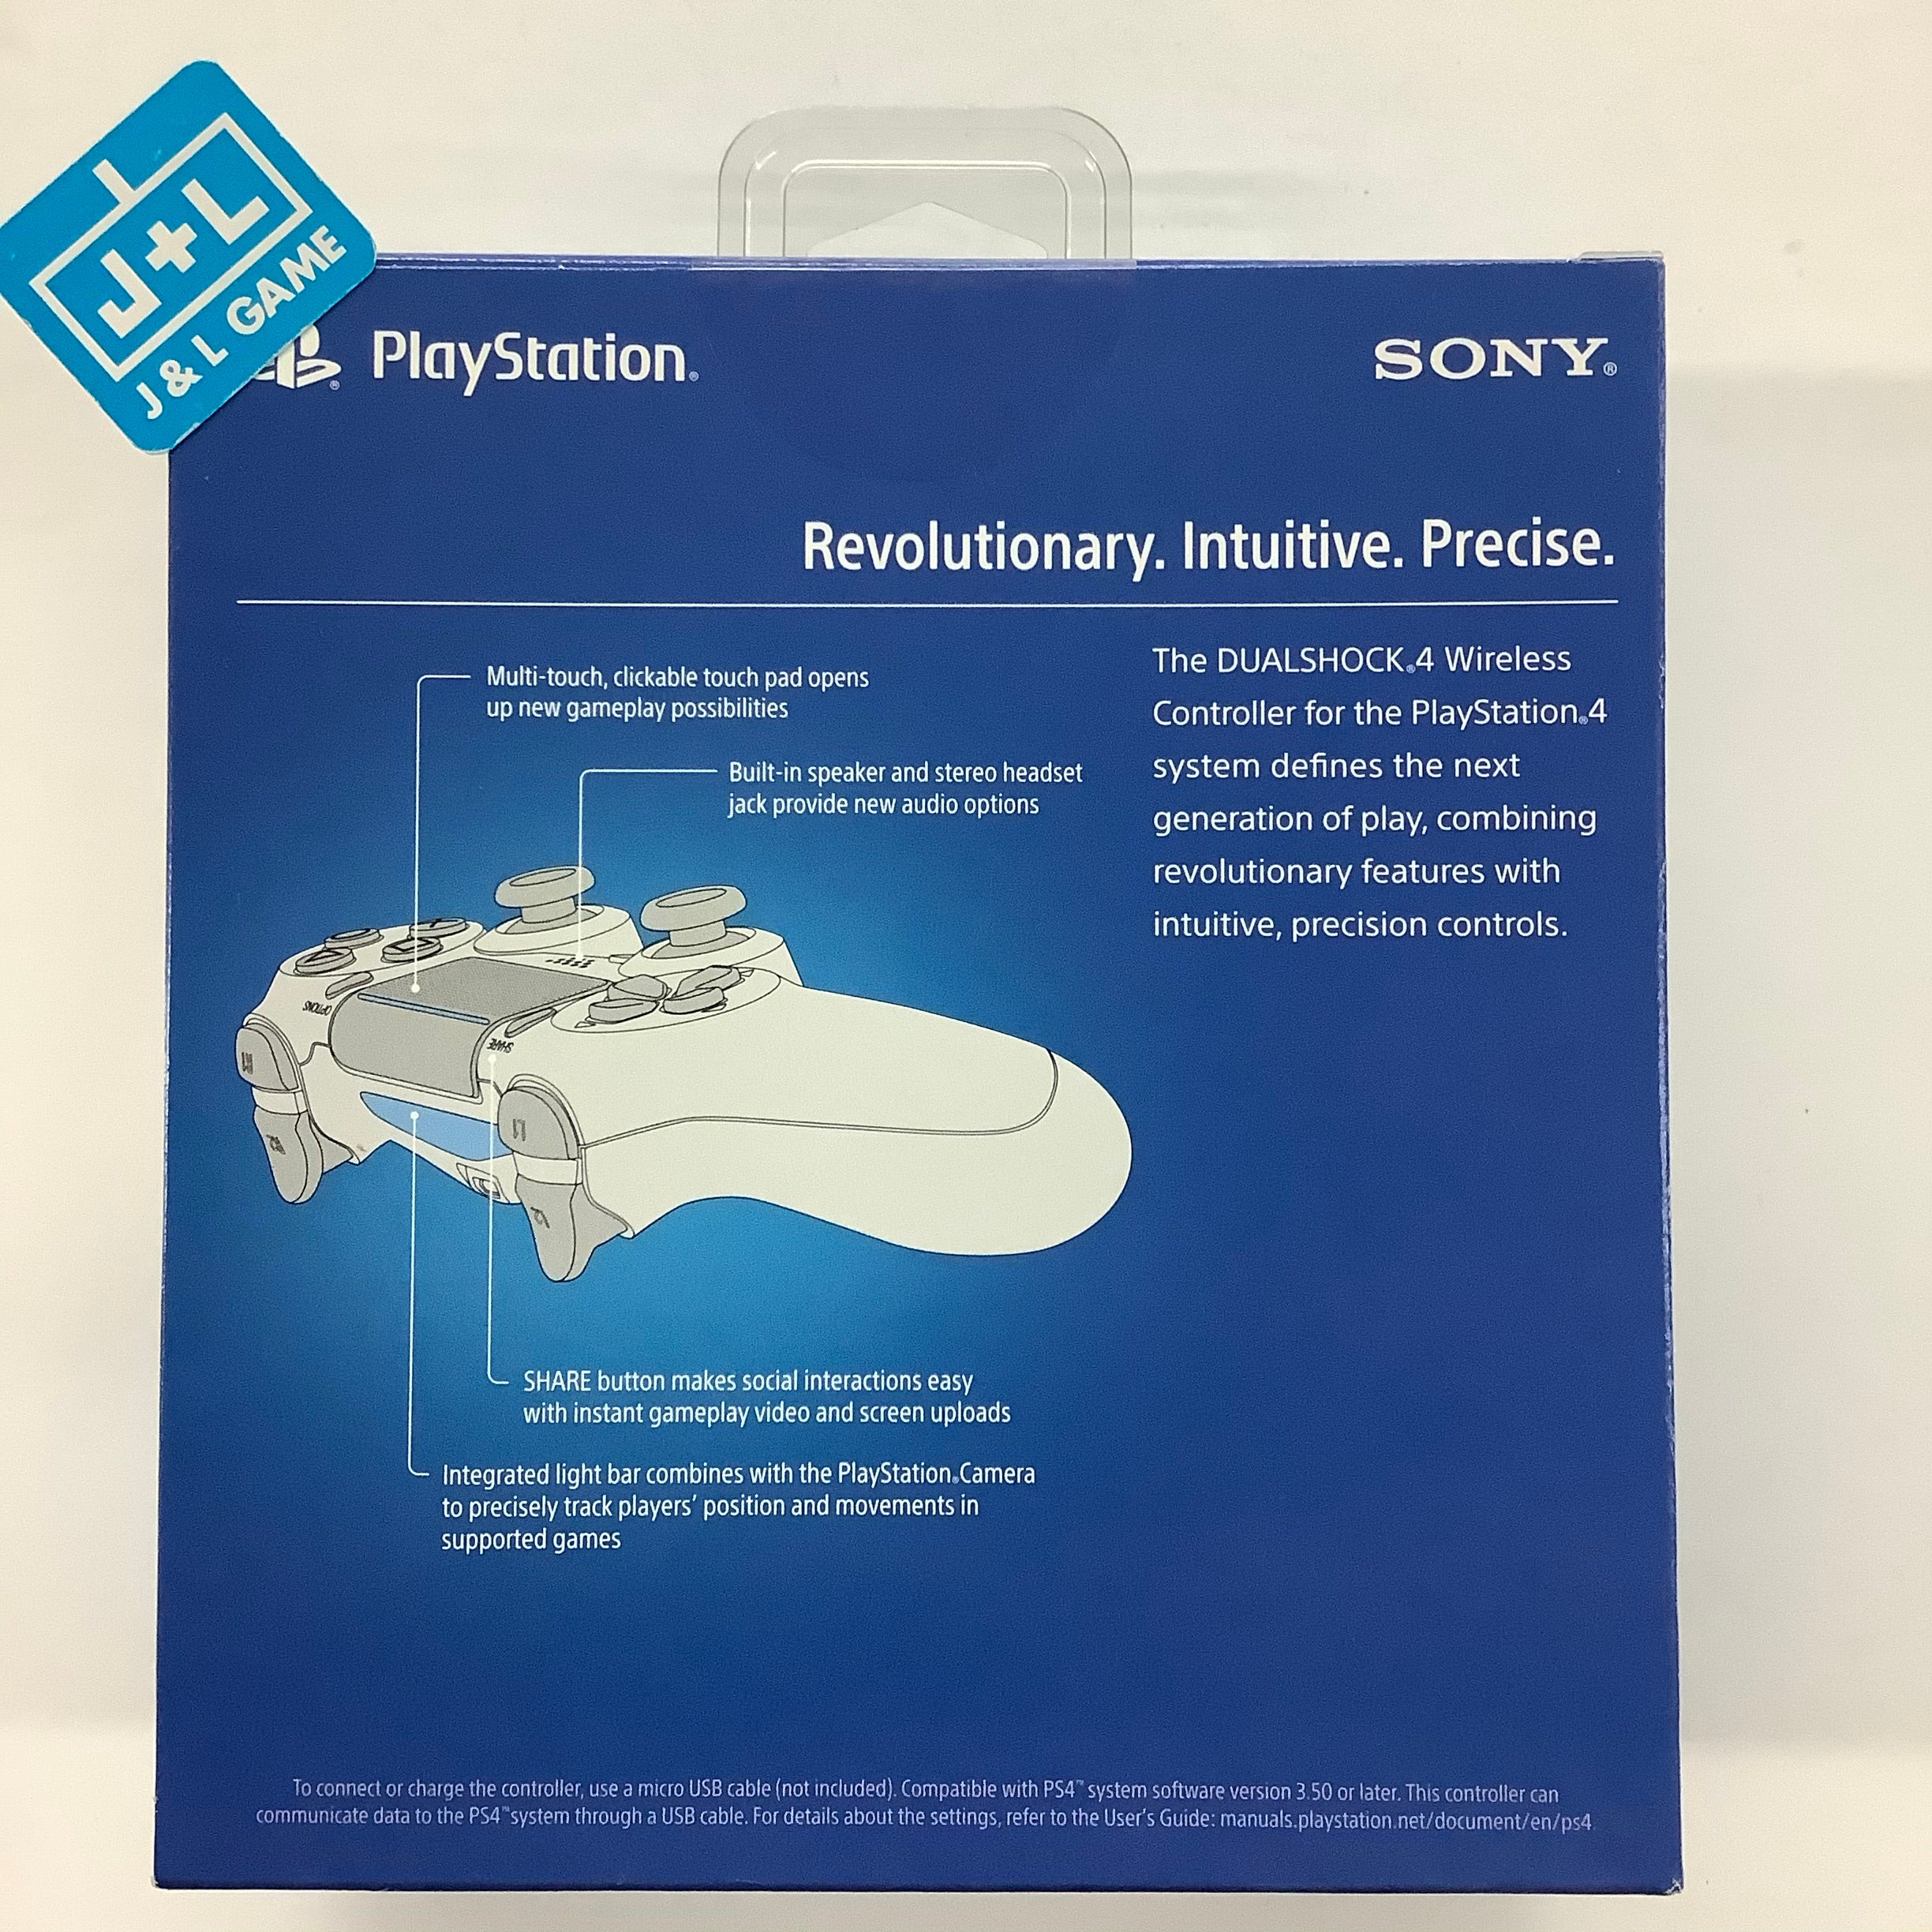 Sony DualShock 4 Wireless Controller (Glacier White) - (PS4) PlayStation 4 Accessories Sony   